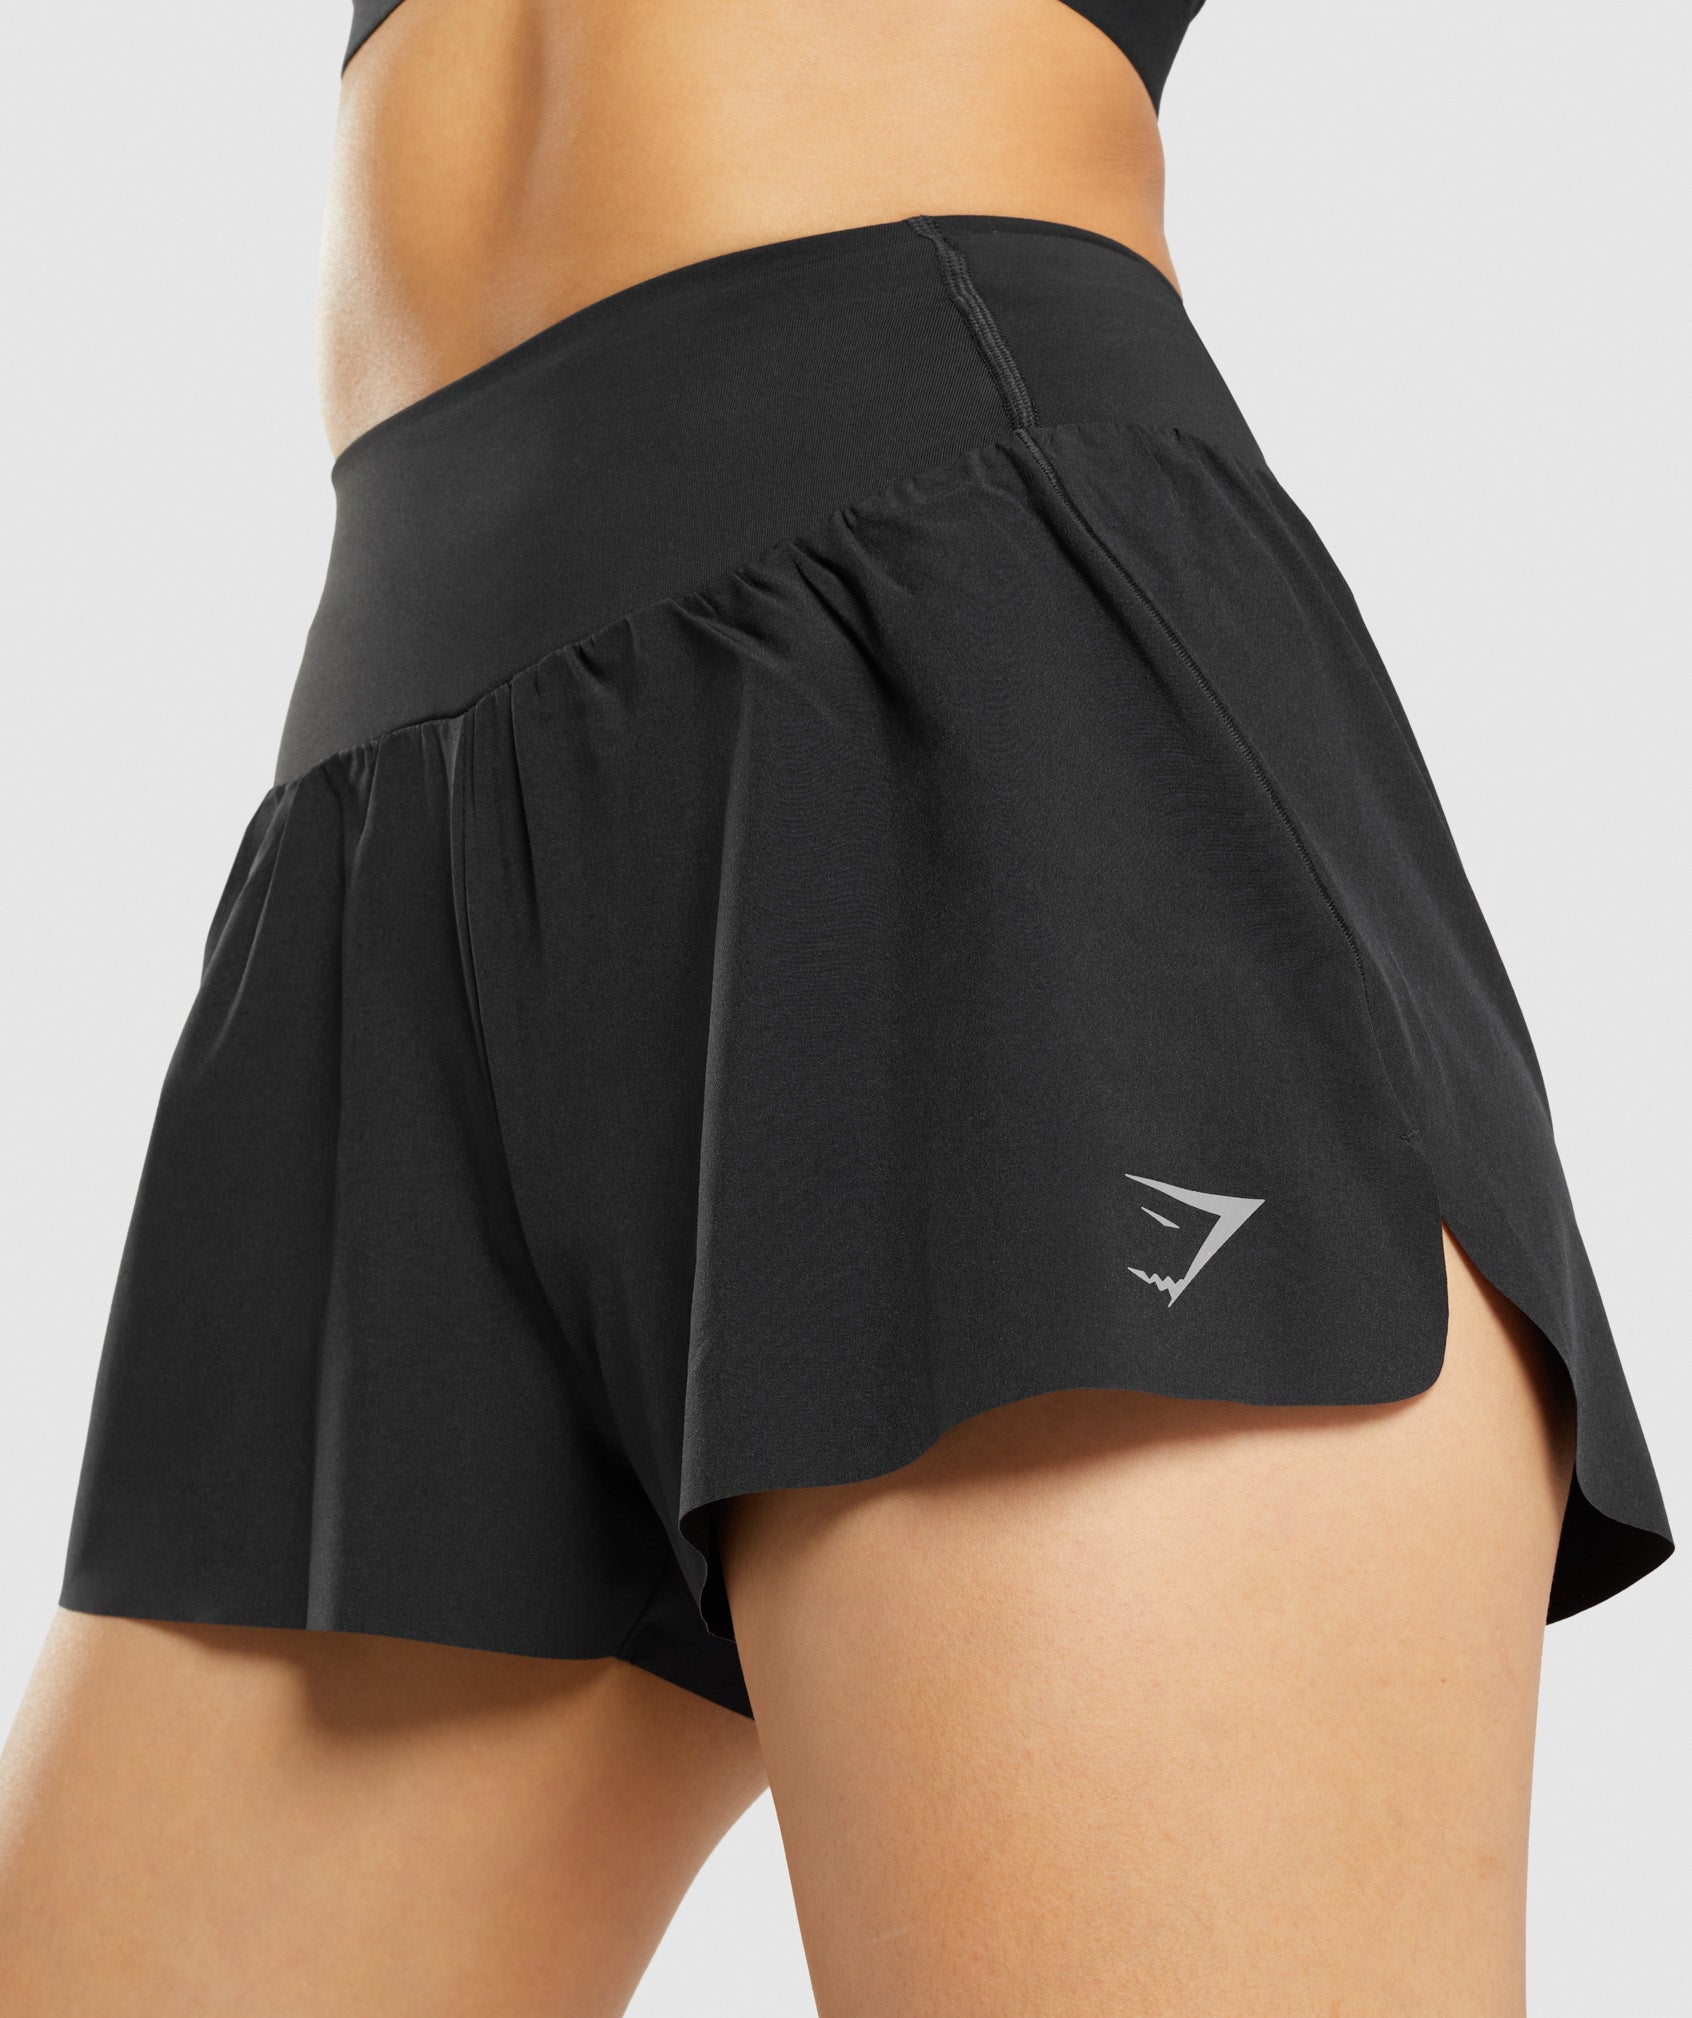 Speed Shorts in Black - view 5